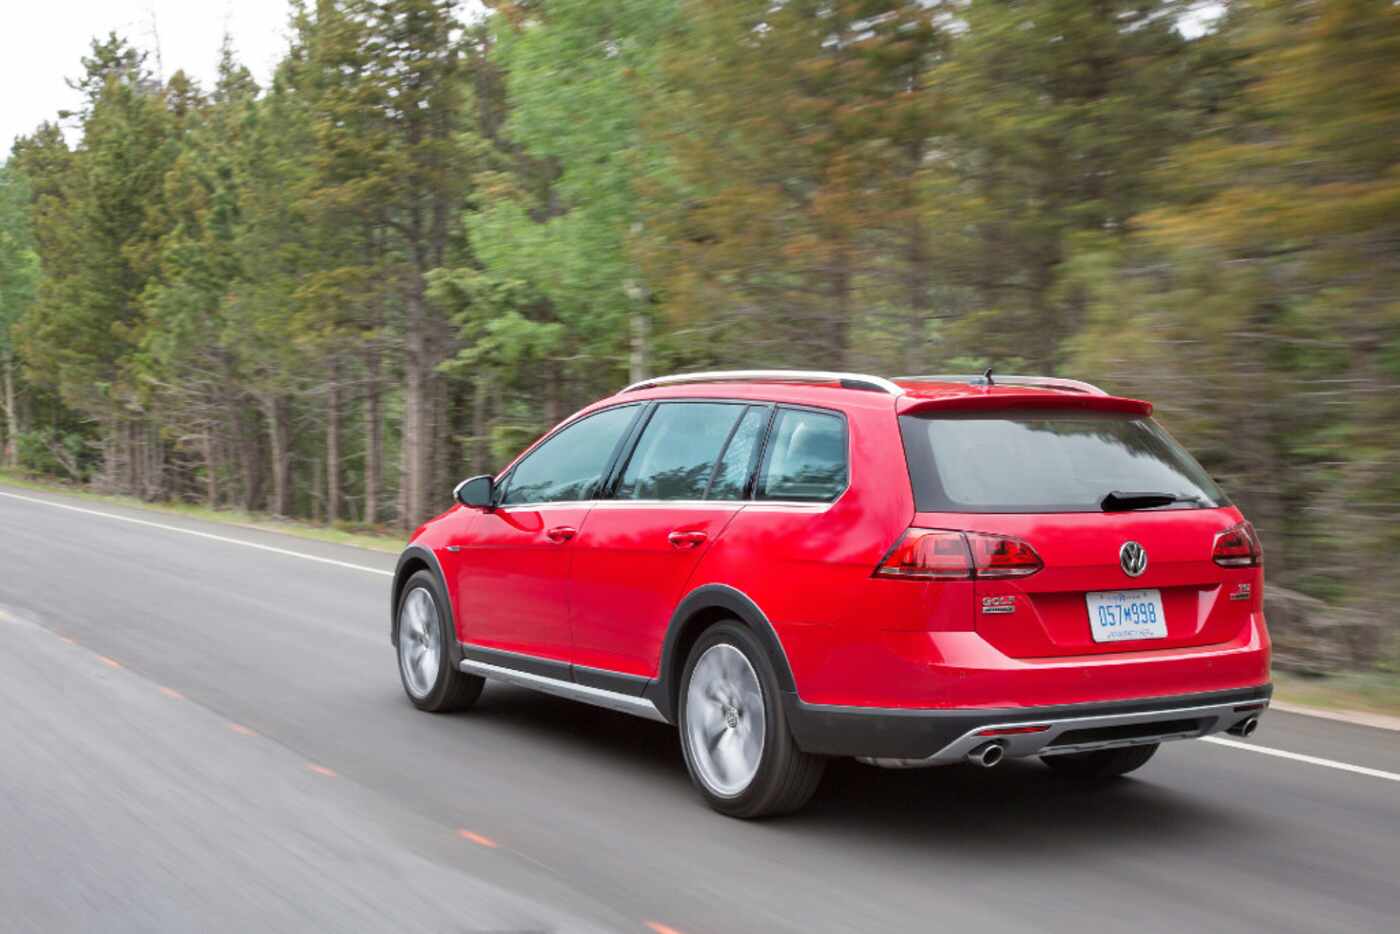 The 2017 Volkswagen Golf Alltrack has a 1.8-liter turbocharged four-cylinder engine rated at...